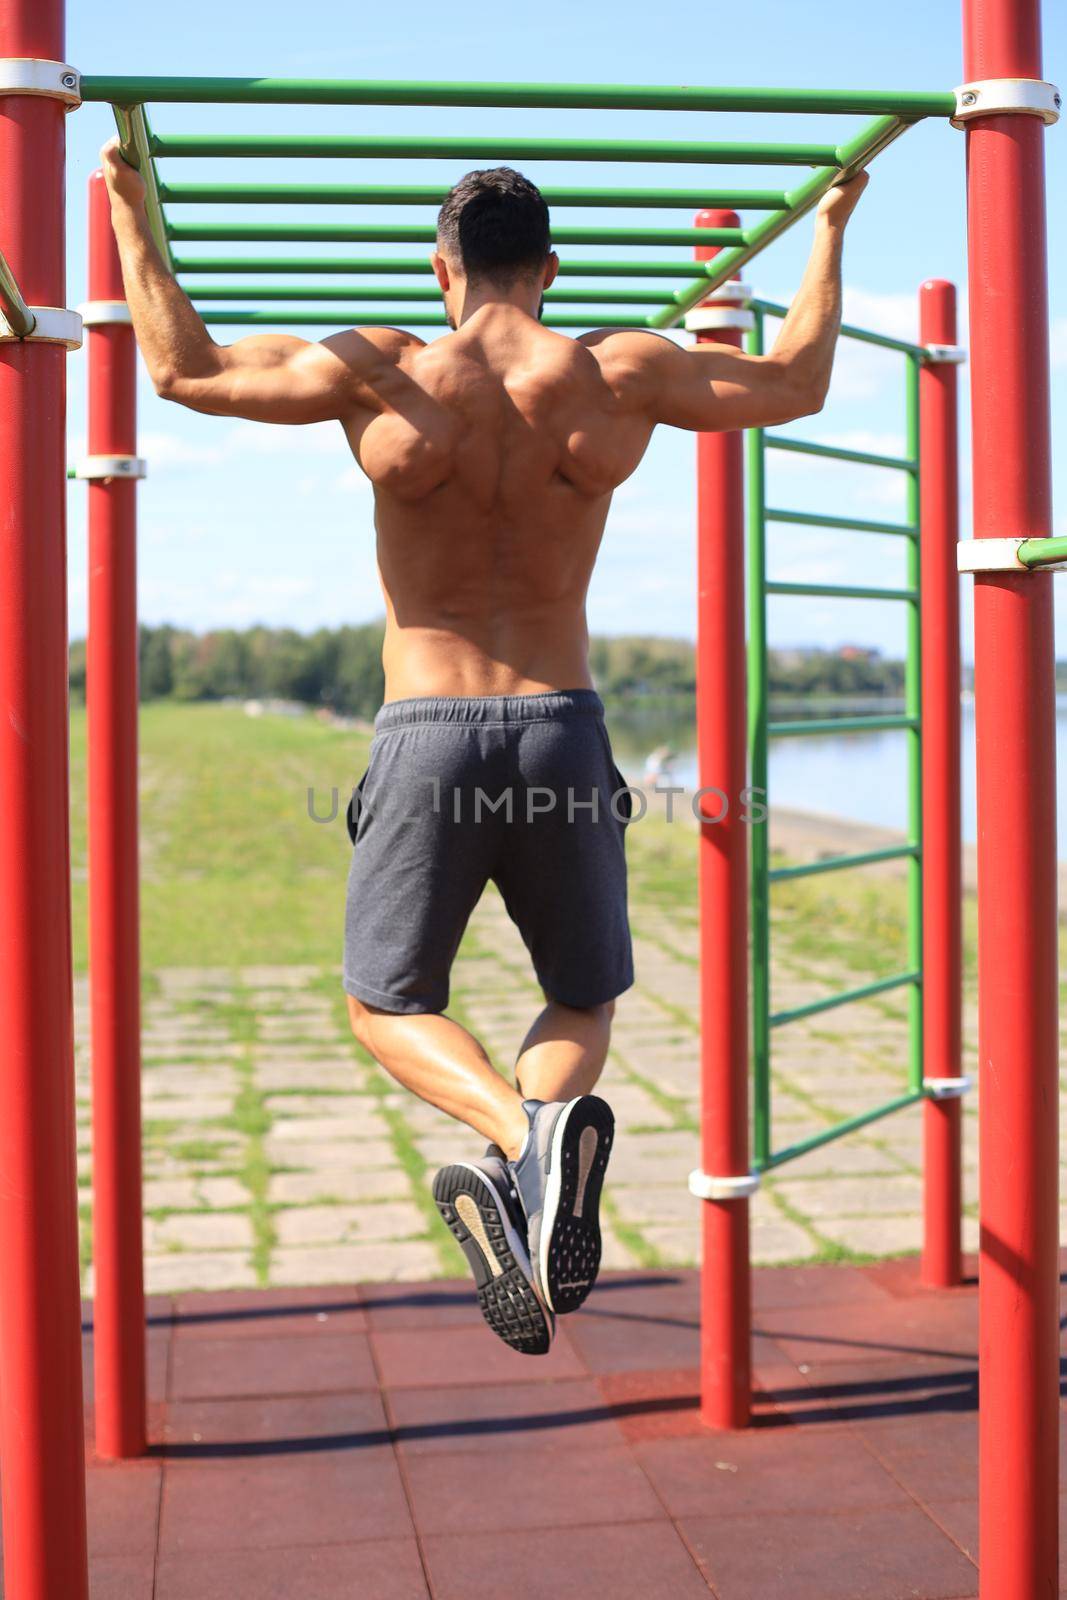 Muscular guy with naked torso pulling up on horizontal bar outdoor by tsyhun